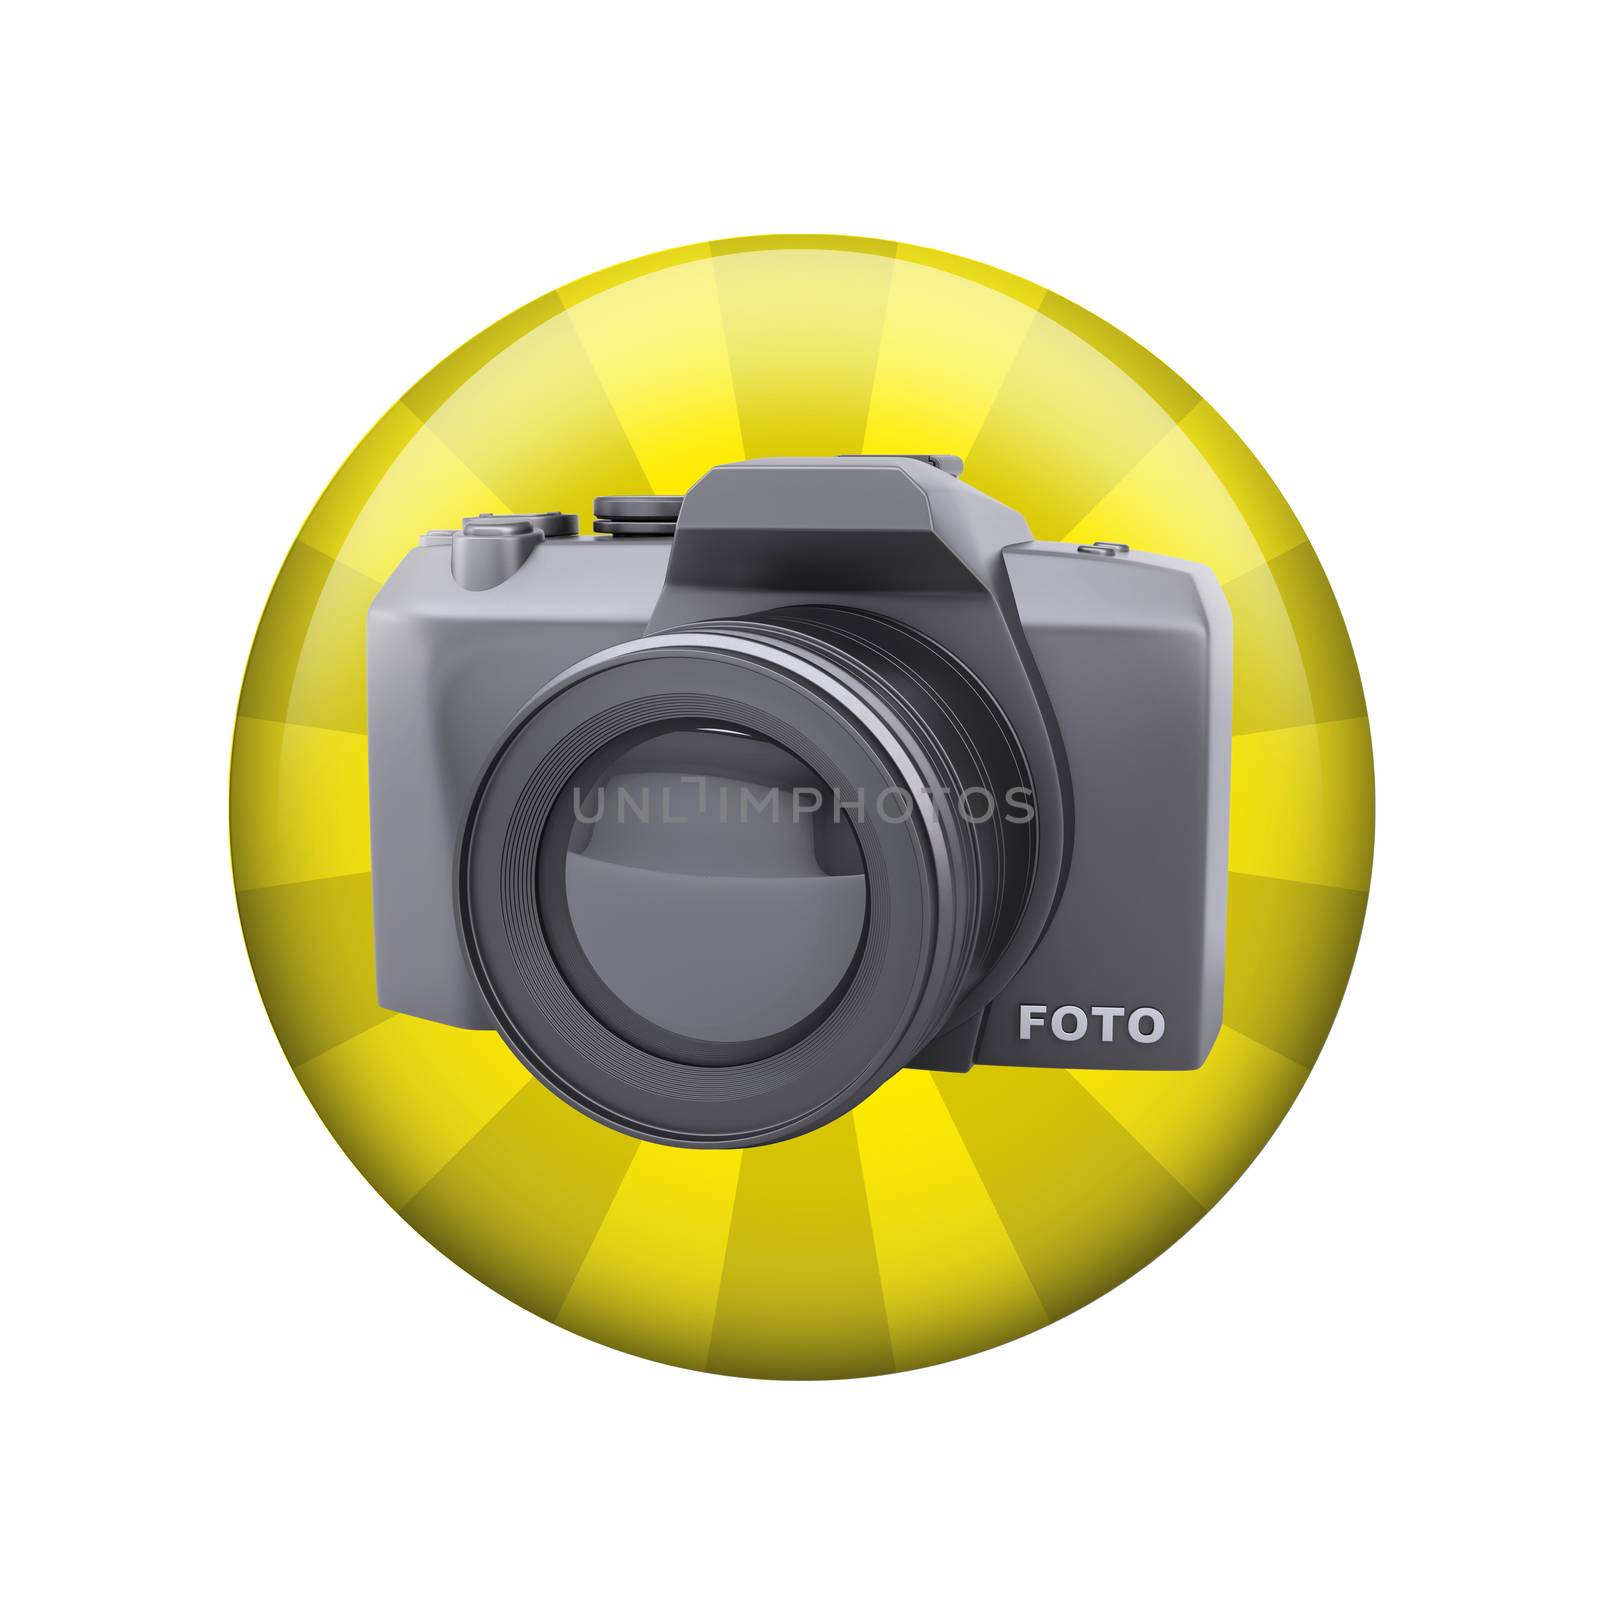 SLR camera. Spherical glossy button. Web element